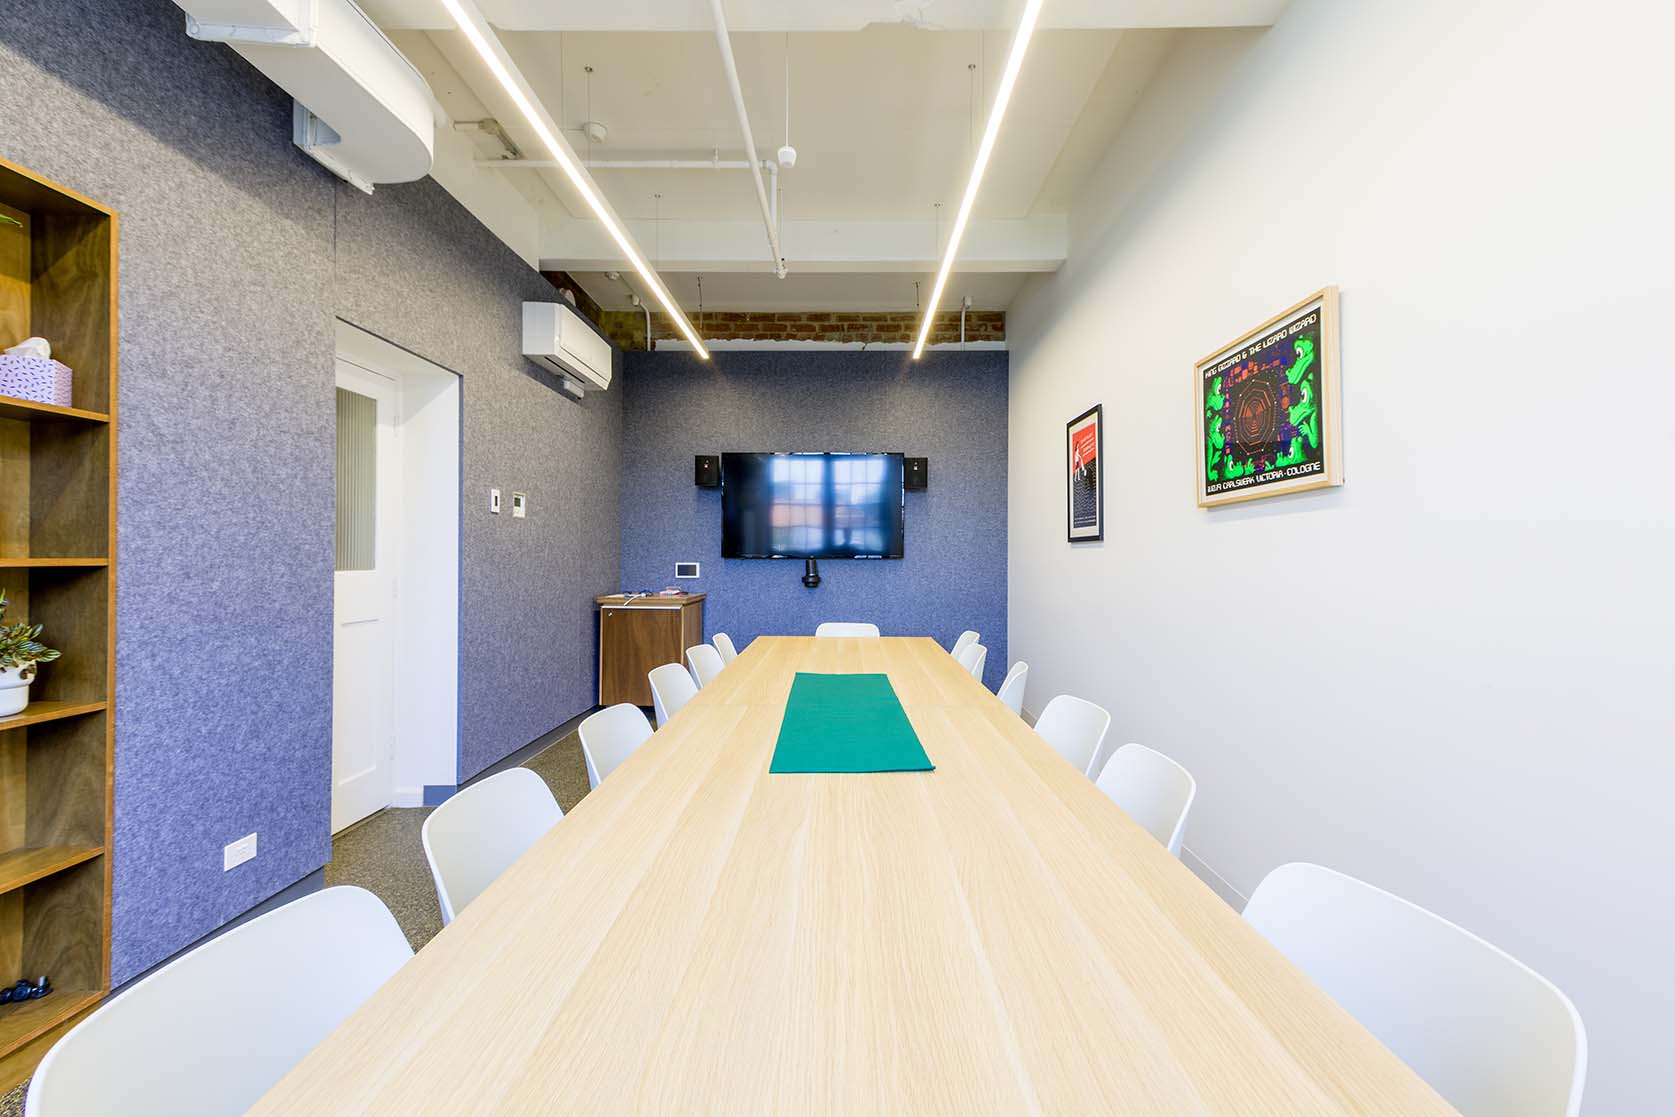 Photo of board room. At the centre is a long wooden table with white chairs leading towards the back of the room. The left and back walls are blue, and the right wall is white. There is a white door to the left, a tv on the back wall, and two art prints on the right.